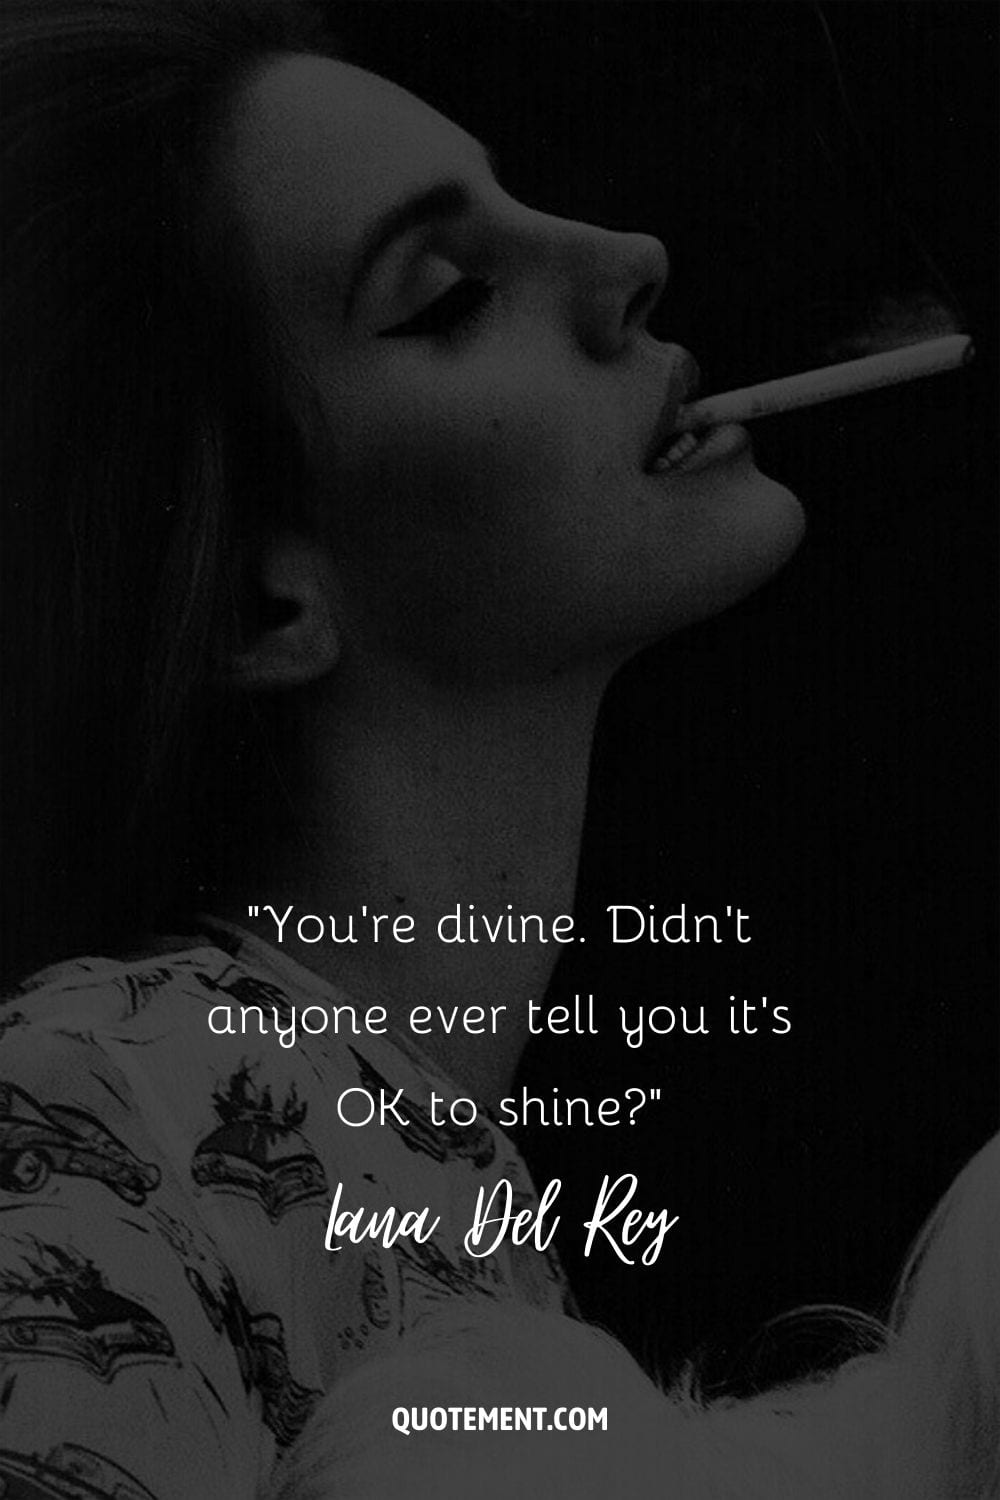 You're divine. Didn't anyone ever tell you it's OK to shine